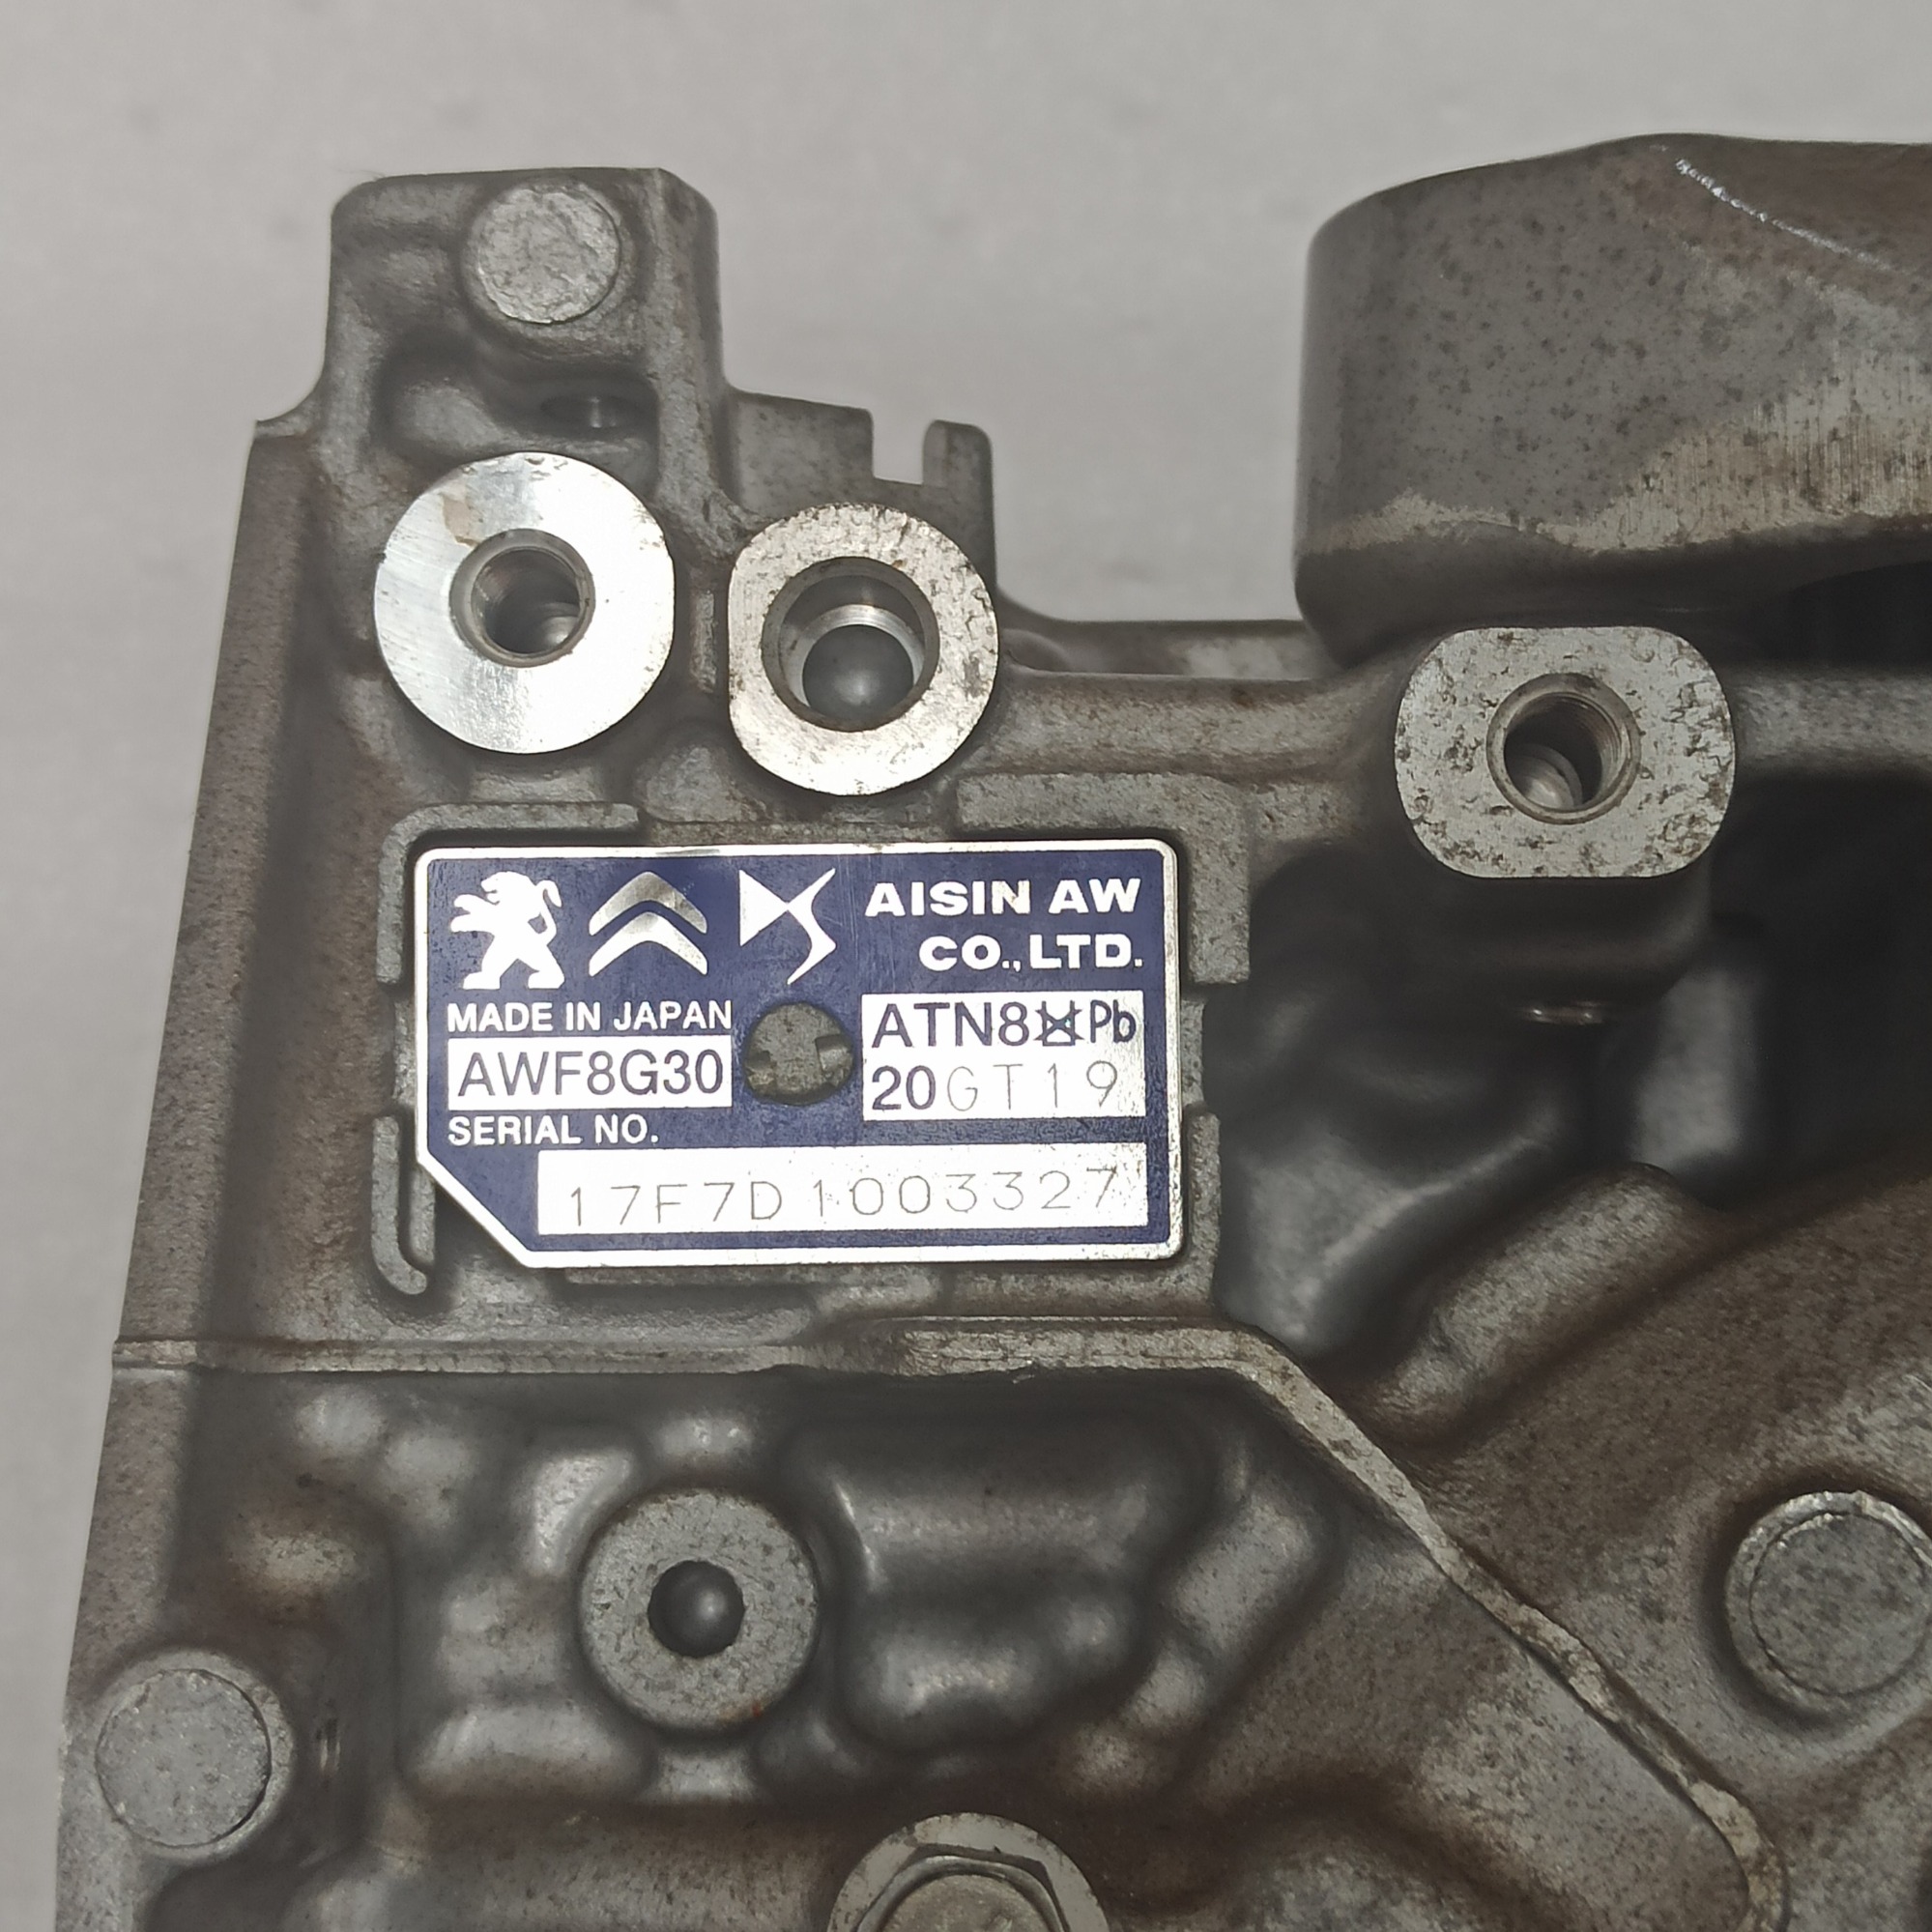 8G30-0018-U1 AWF8G30 mid case U1, for repair or replace or test of car